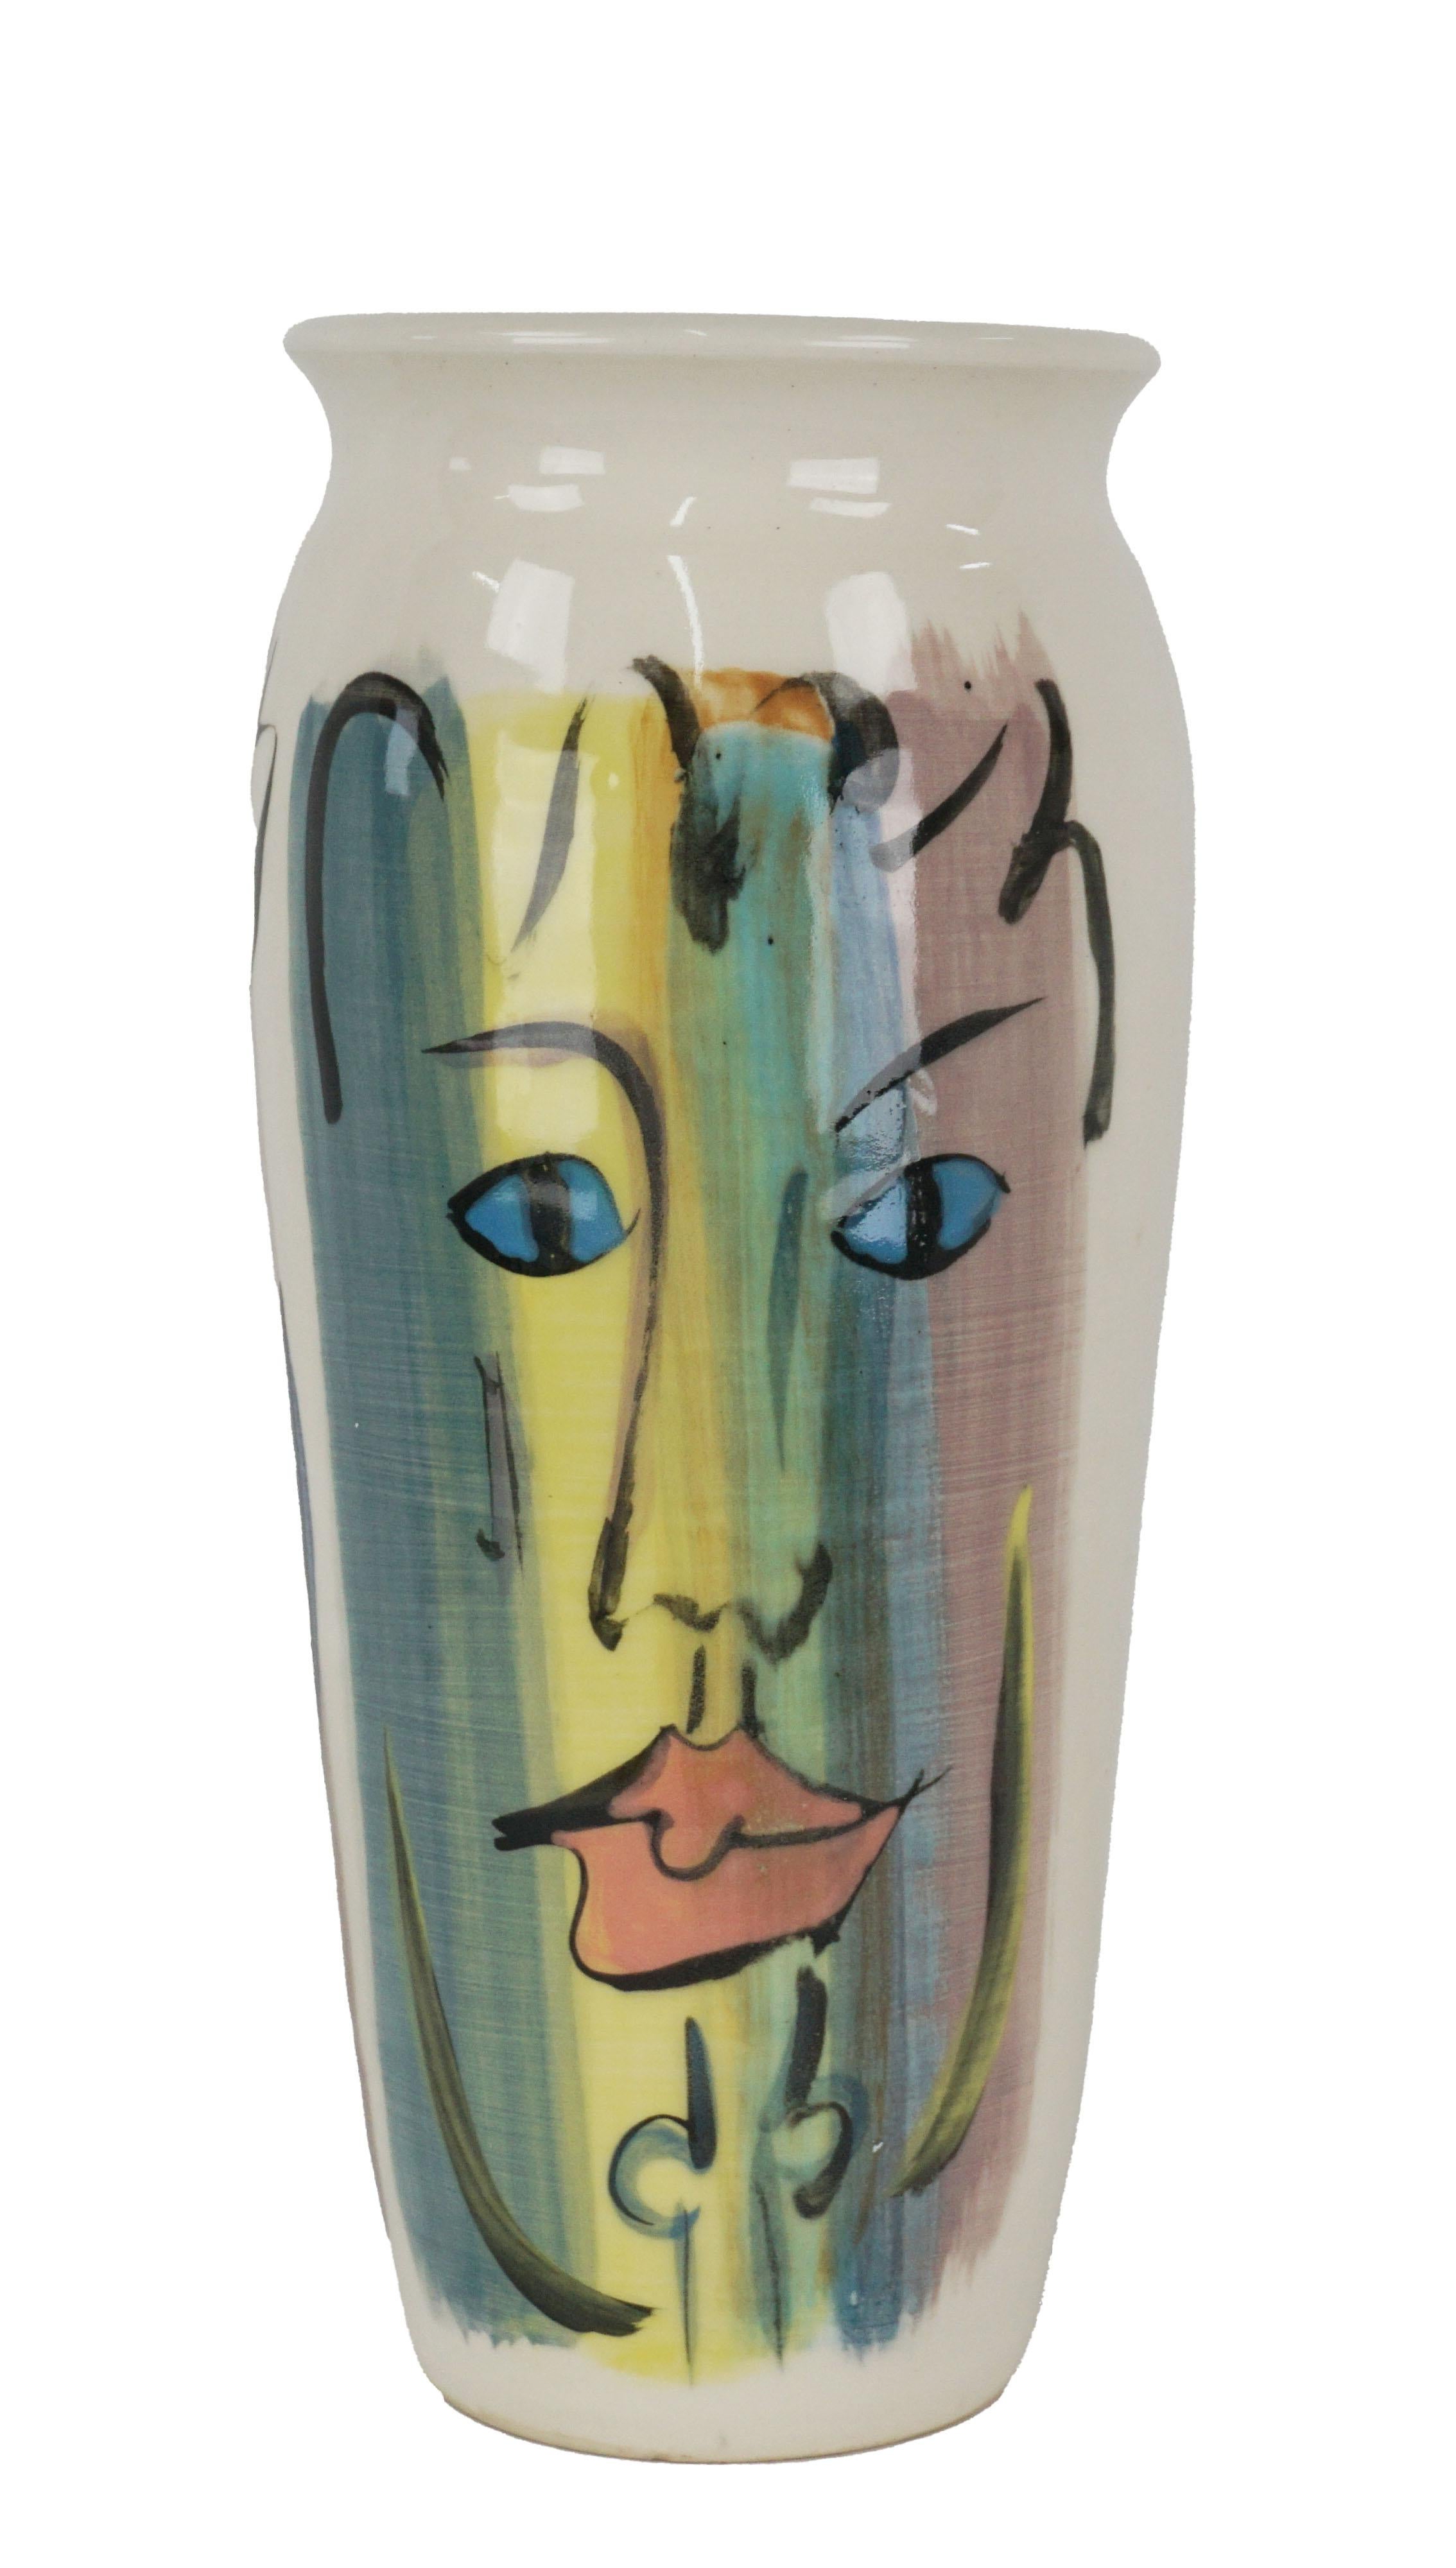 Very fun large vase with three abstracted faces by Northern California ceramist Karen Waterman (American, b. 1959), 1994. Ivory glaze background with 